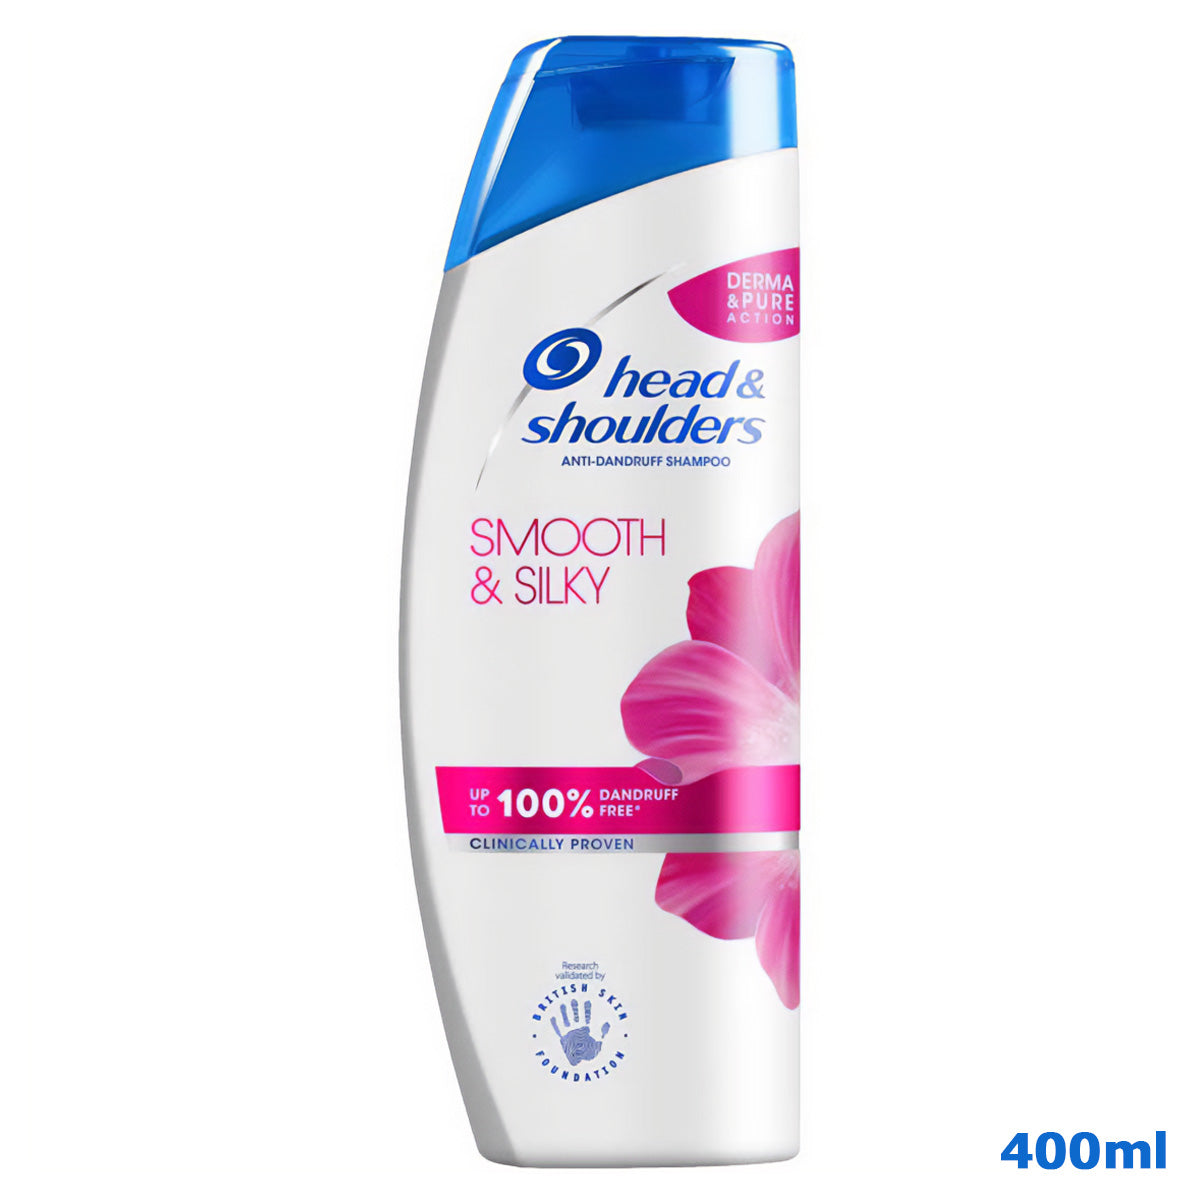 Head & Shoulders - Smooth & Silky Shampoo - 400ml - Continental Food Store